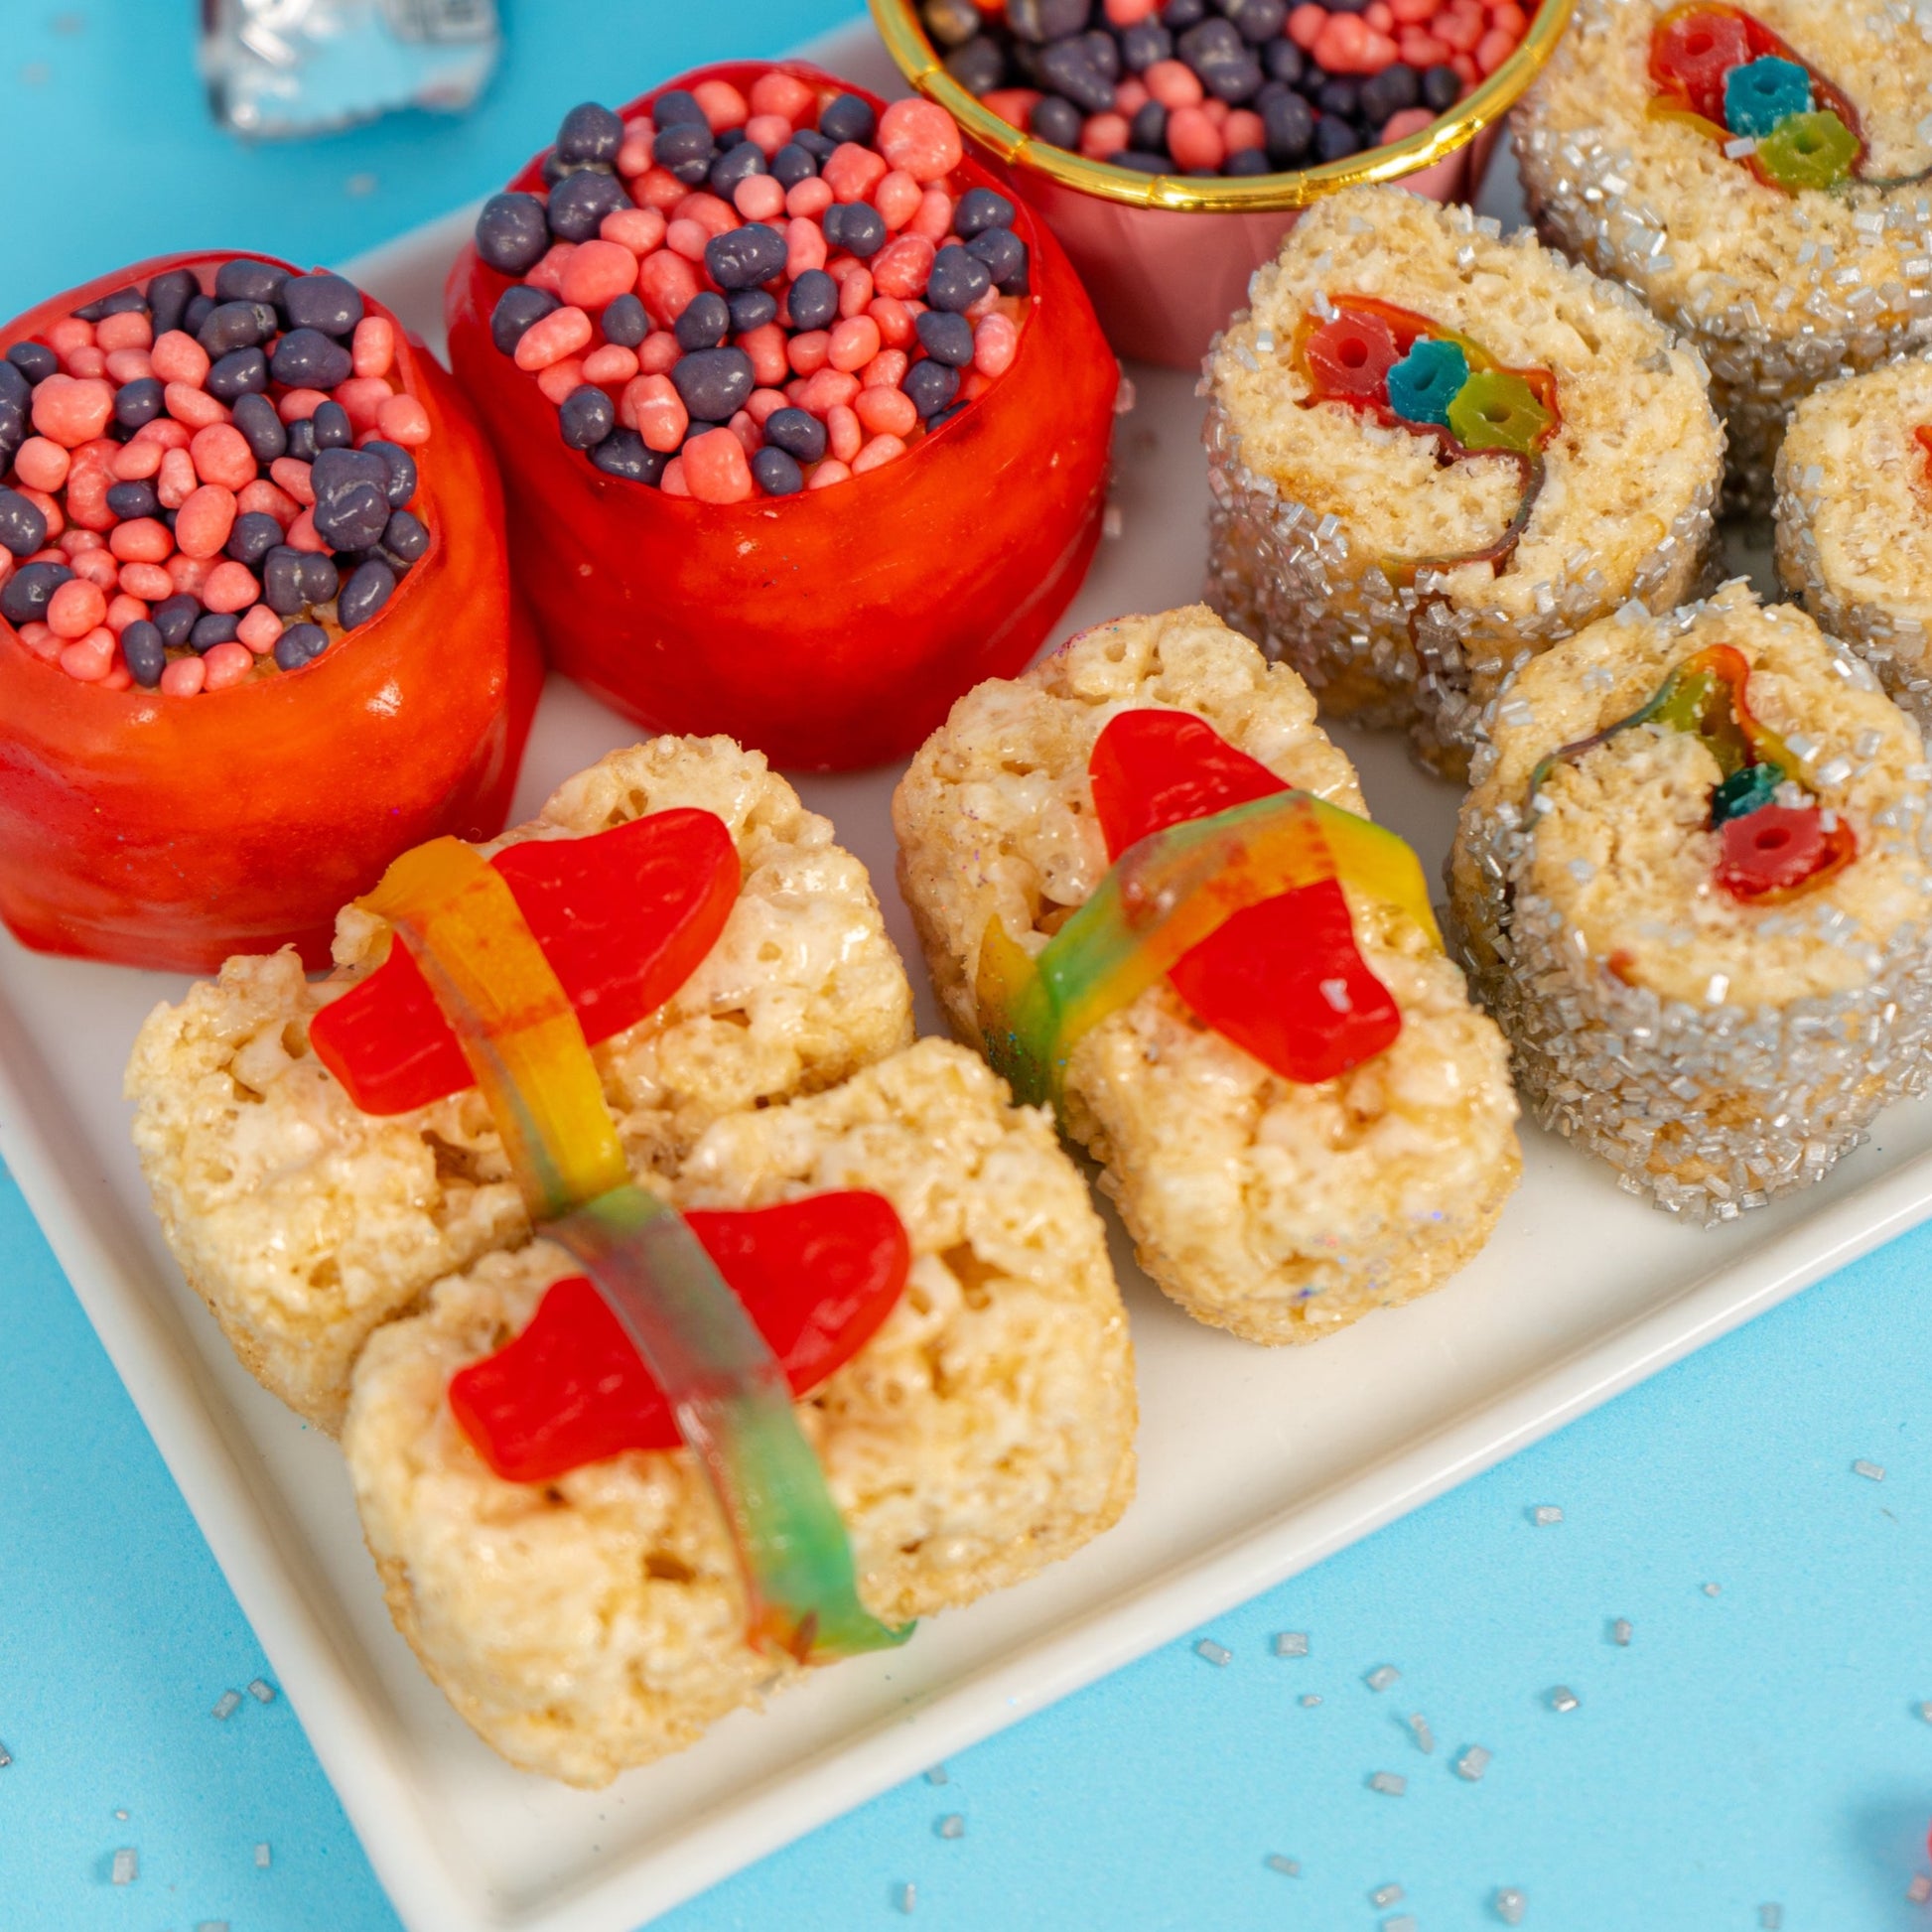 How to Make Kit Kat Candy Sushi Dessert - Sugar and Charm